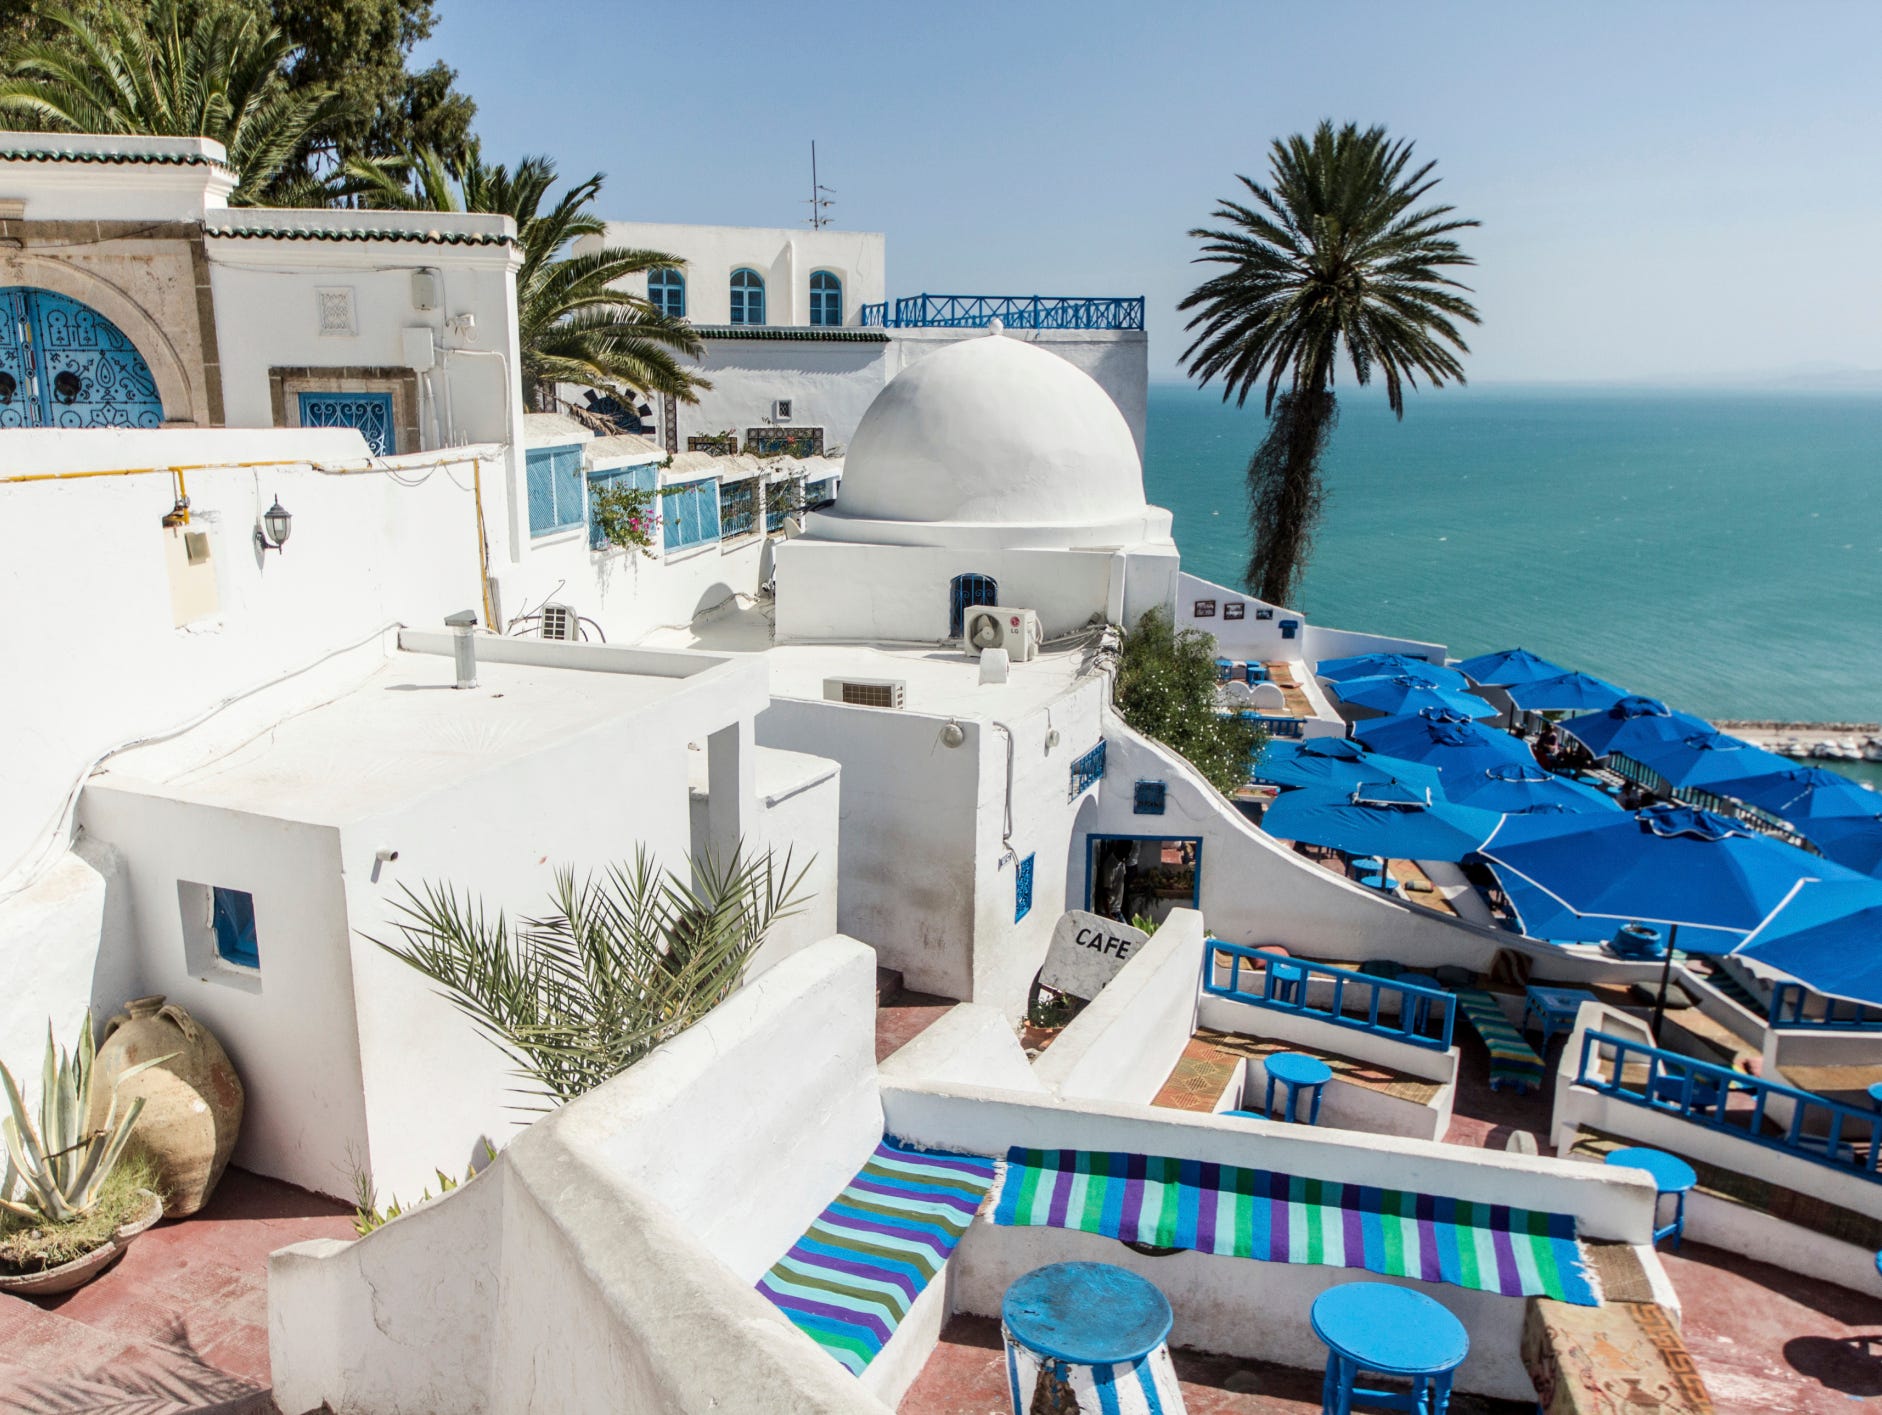 For Lonely Planet's global Best in Travel list, Tunisia was the best value destination.